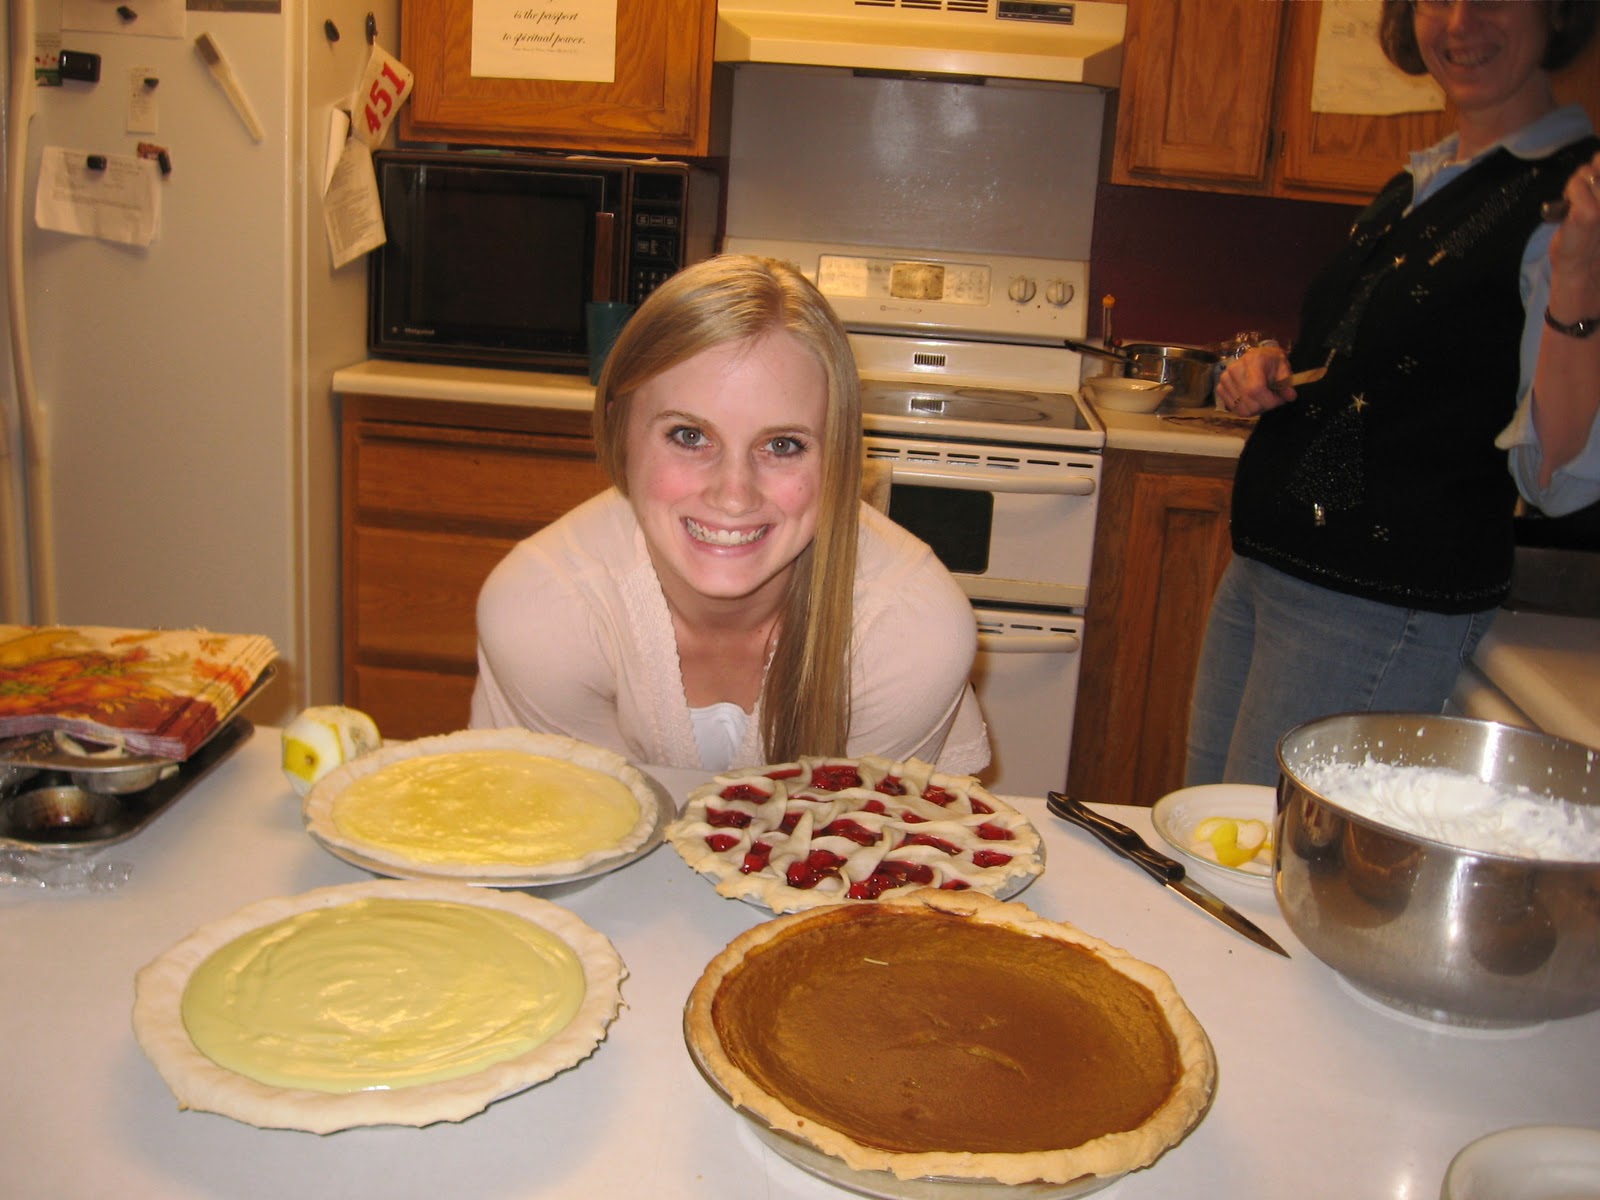 Sarah, look we made all these pies! aren't you proud?